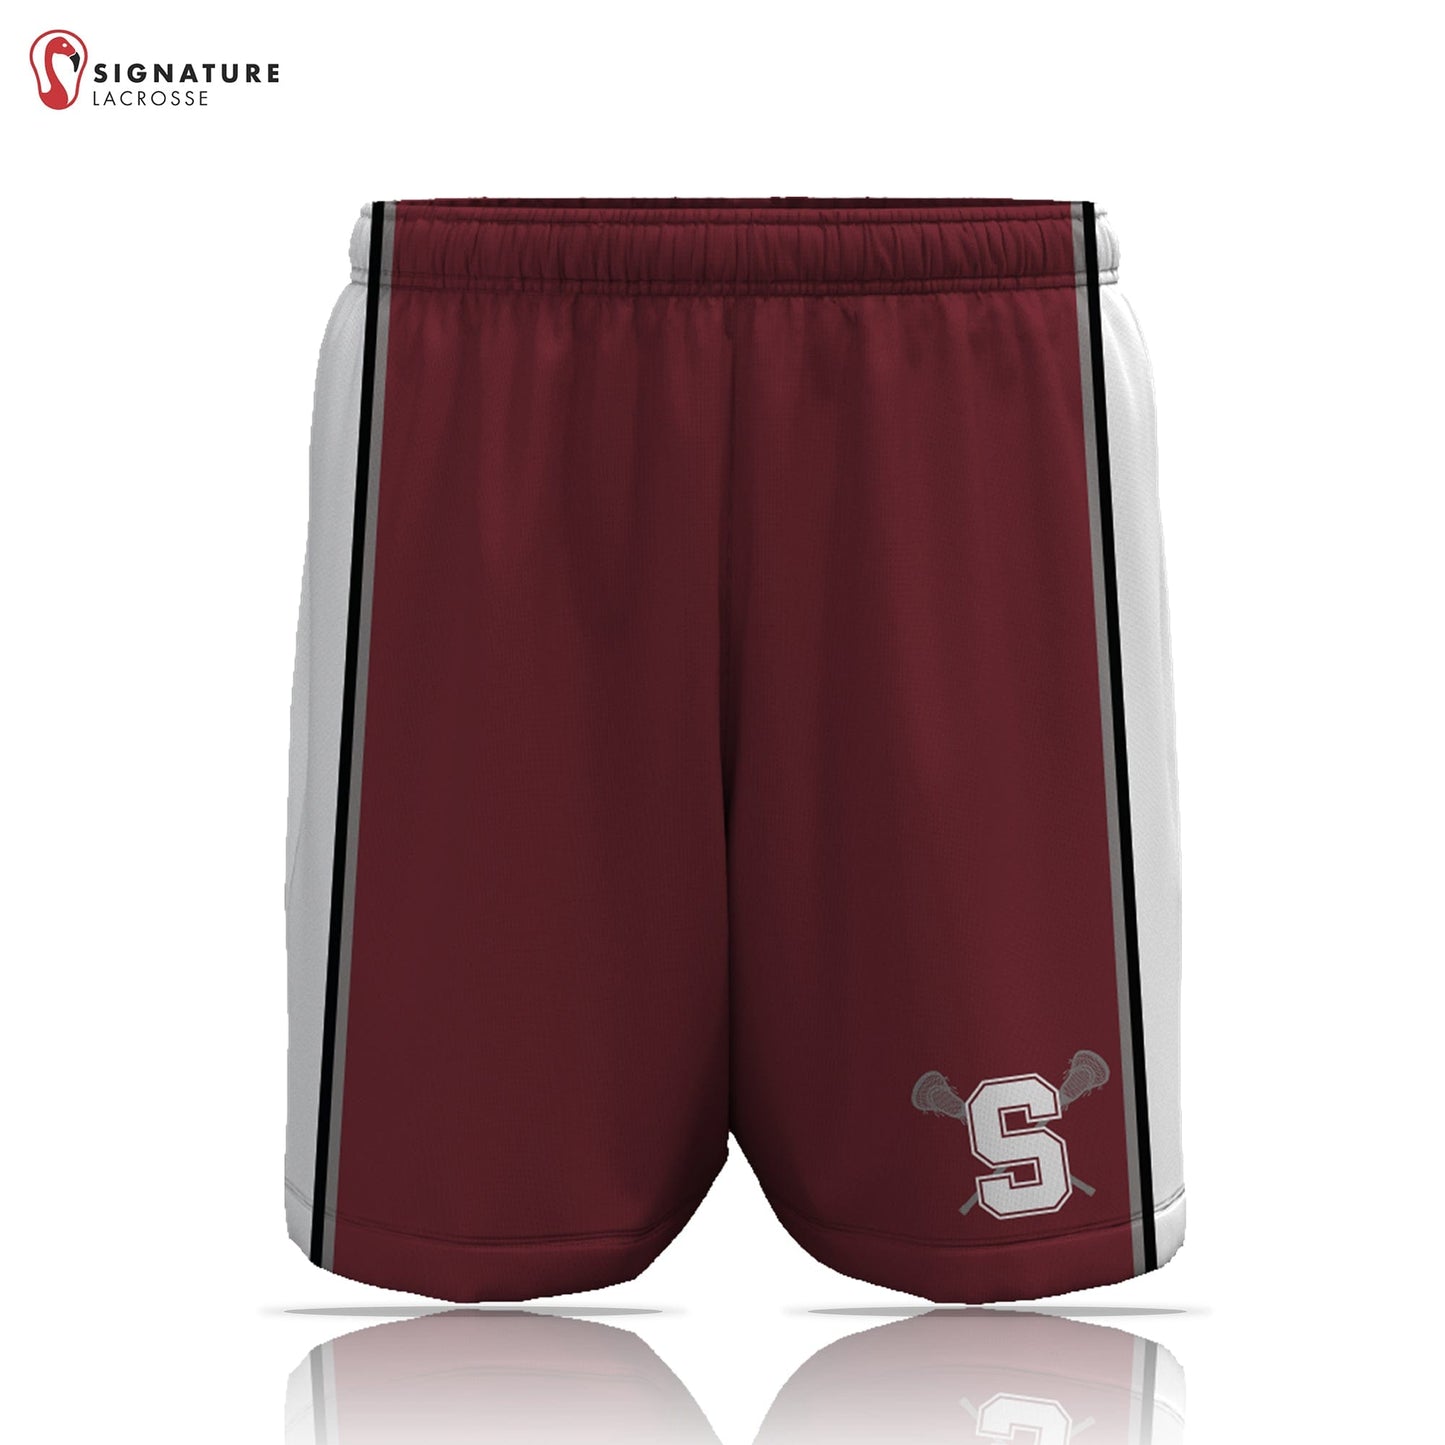 State College Men's Player Game Shorts: 3-4 Signature Lacrosse